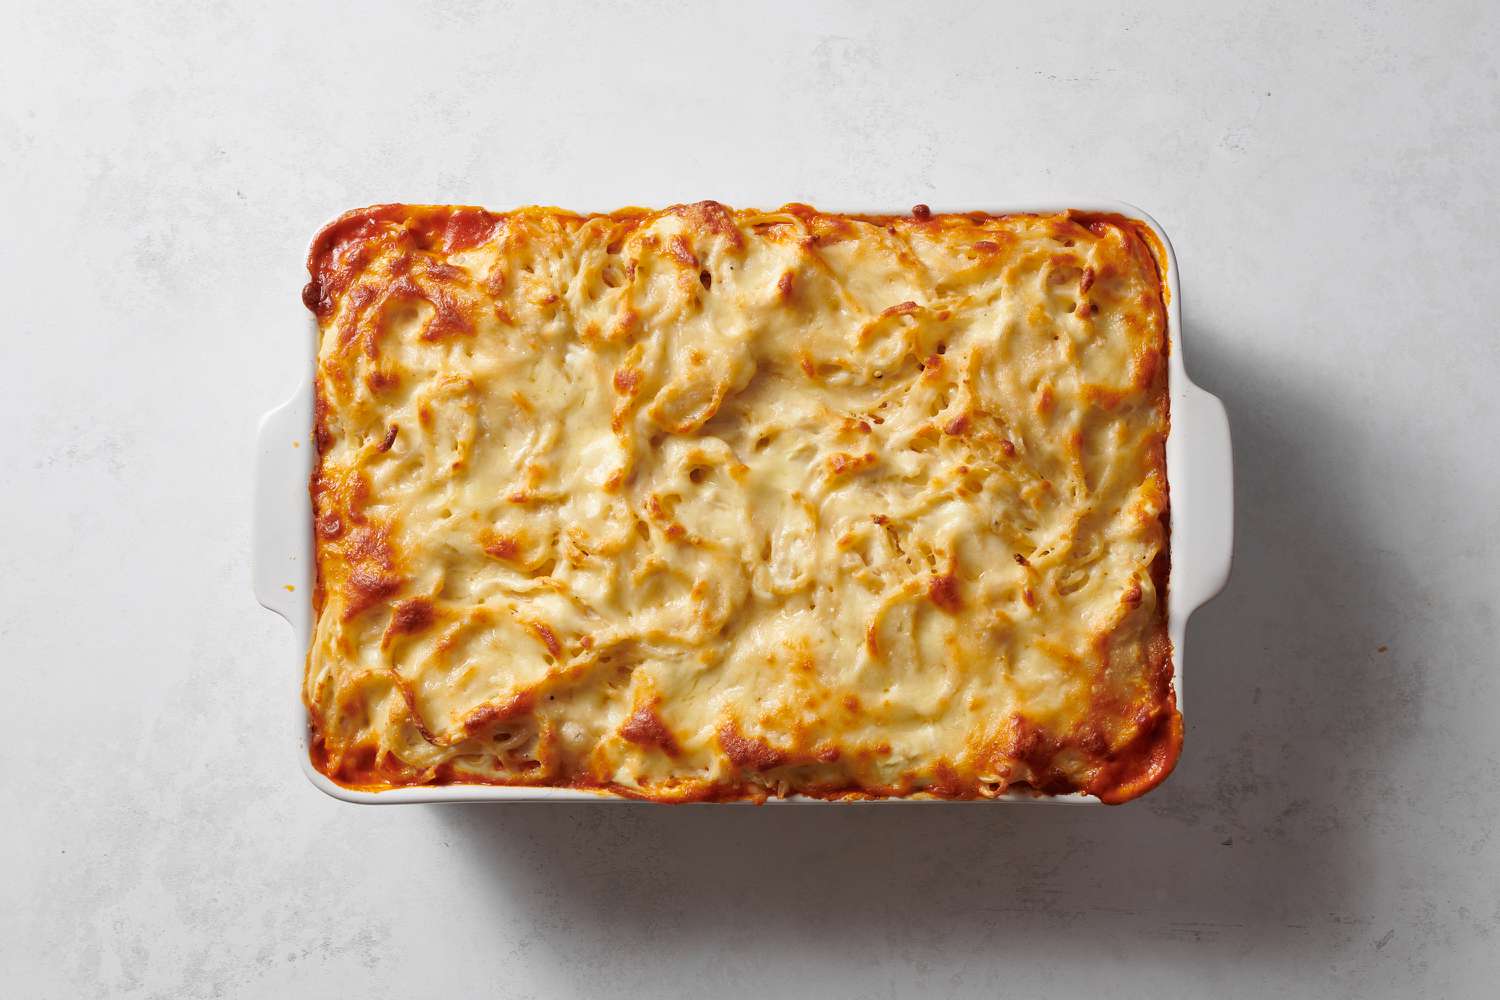 A baked pasta casserole topped with melted cheese